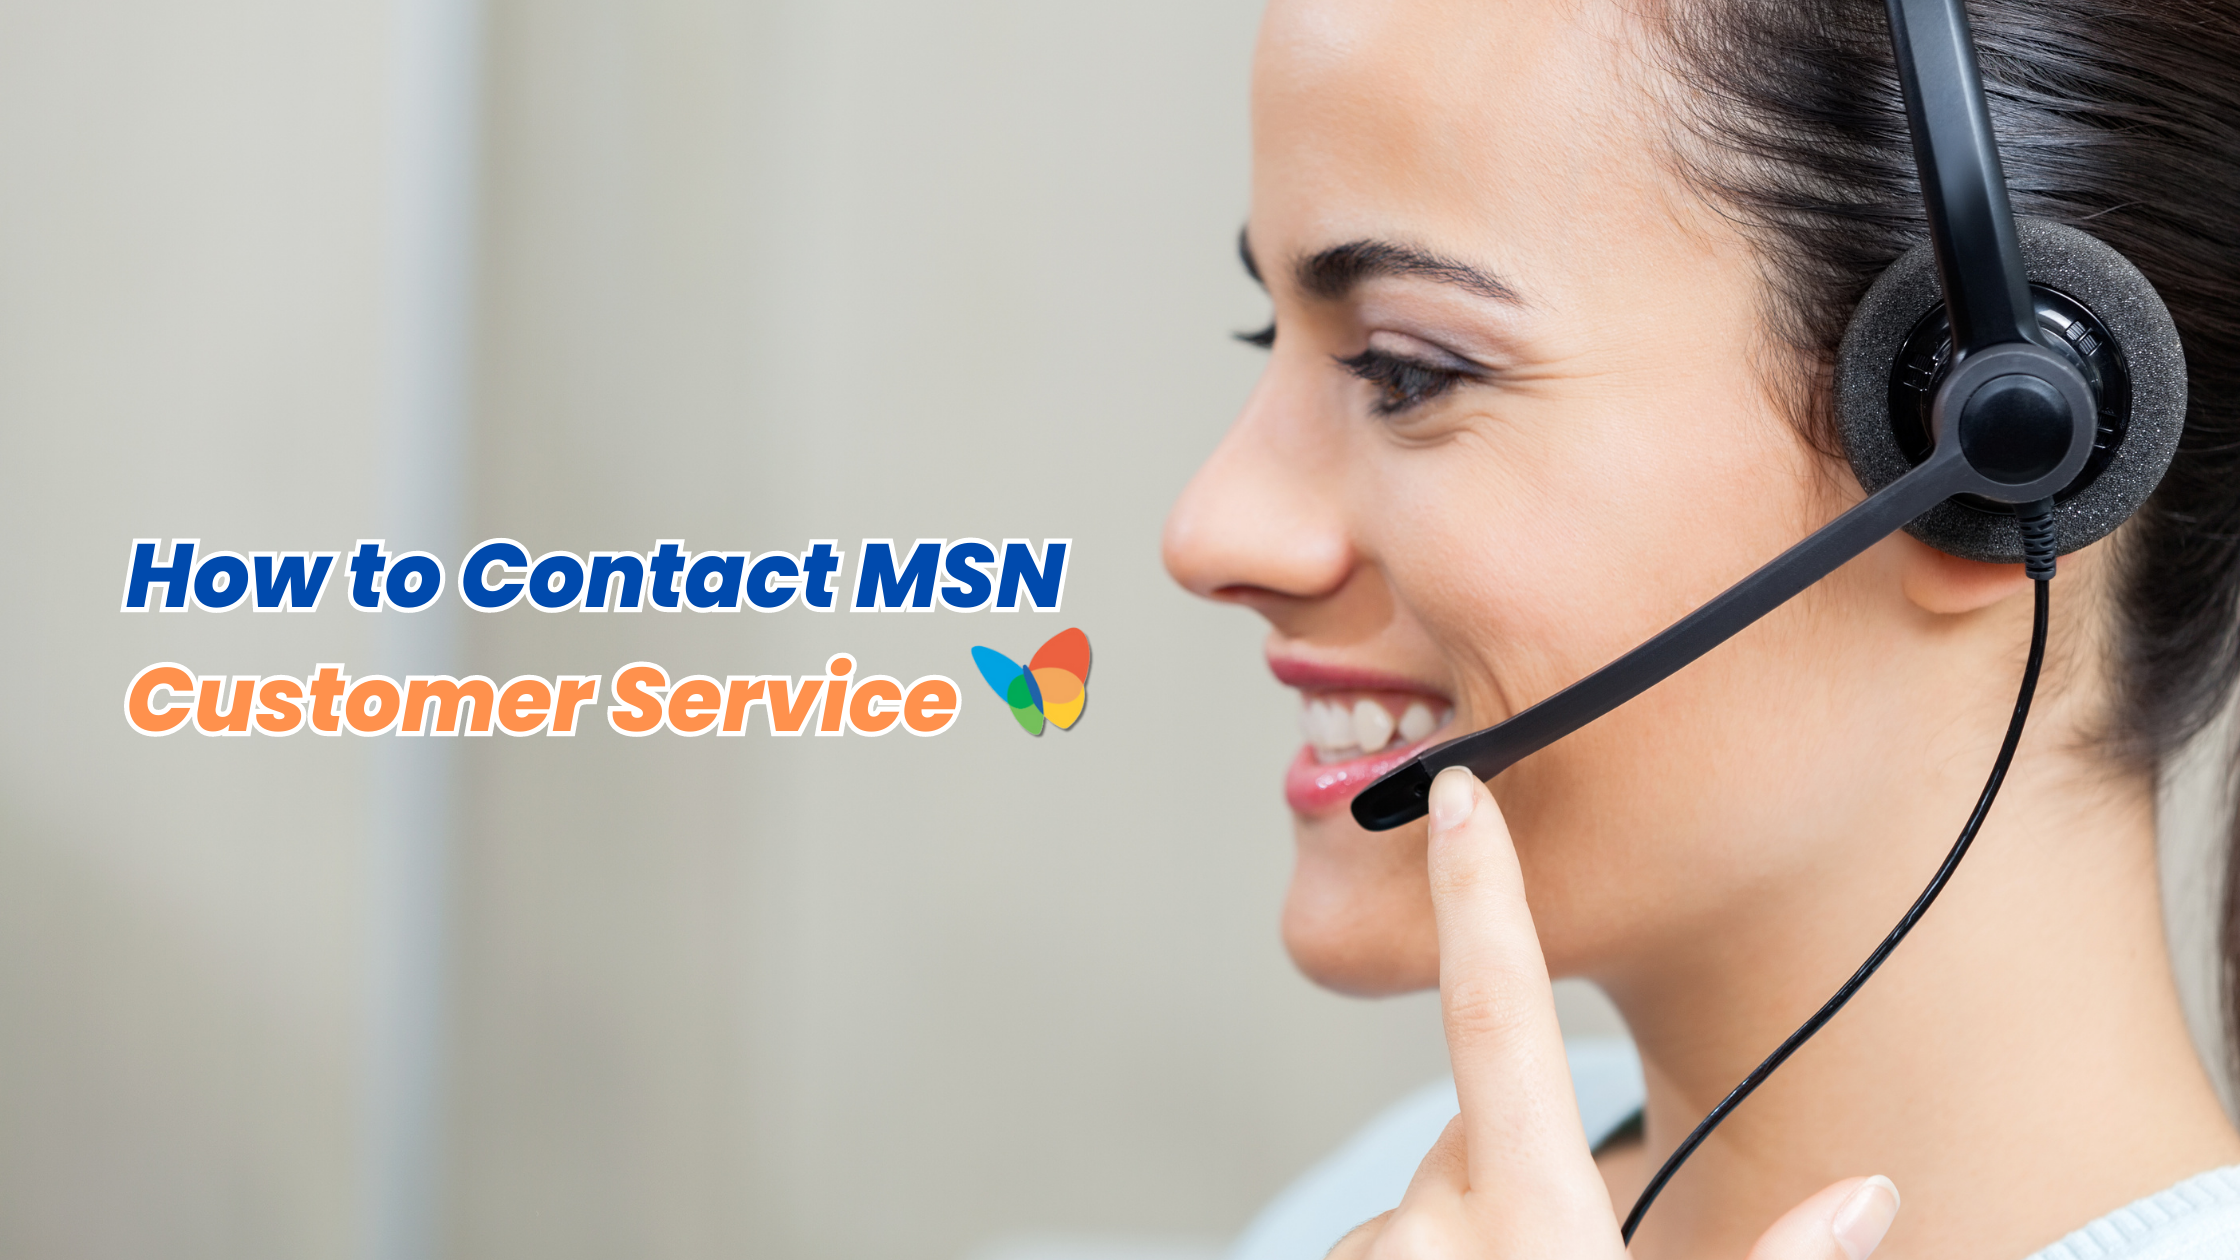 How To Contact MSN Customer Service